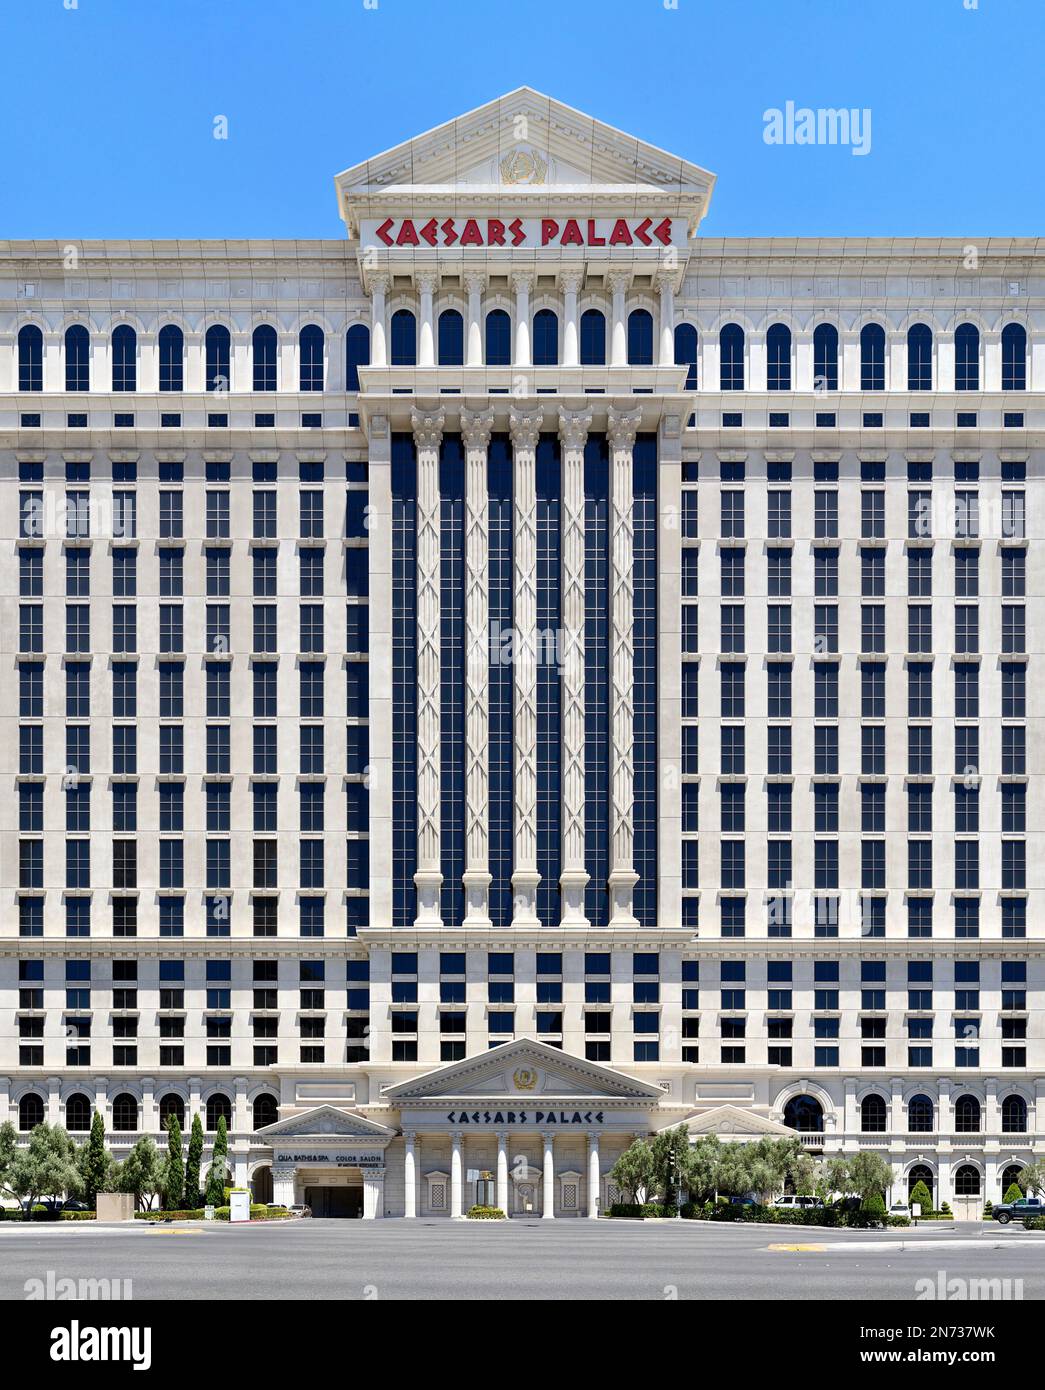 Las Vegas, Caesars Palace Casino hotel towers on Las Vegas Strip/Boulevard. Brutal architecture in the US gambler's paradise, based on ancient Roman temples. Linear visualization in multi-perspective panorama Stock Photo